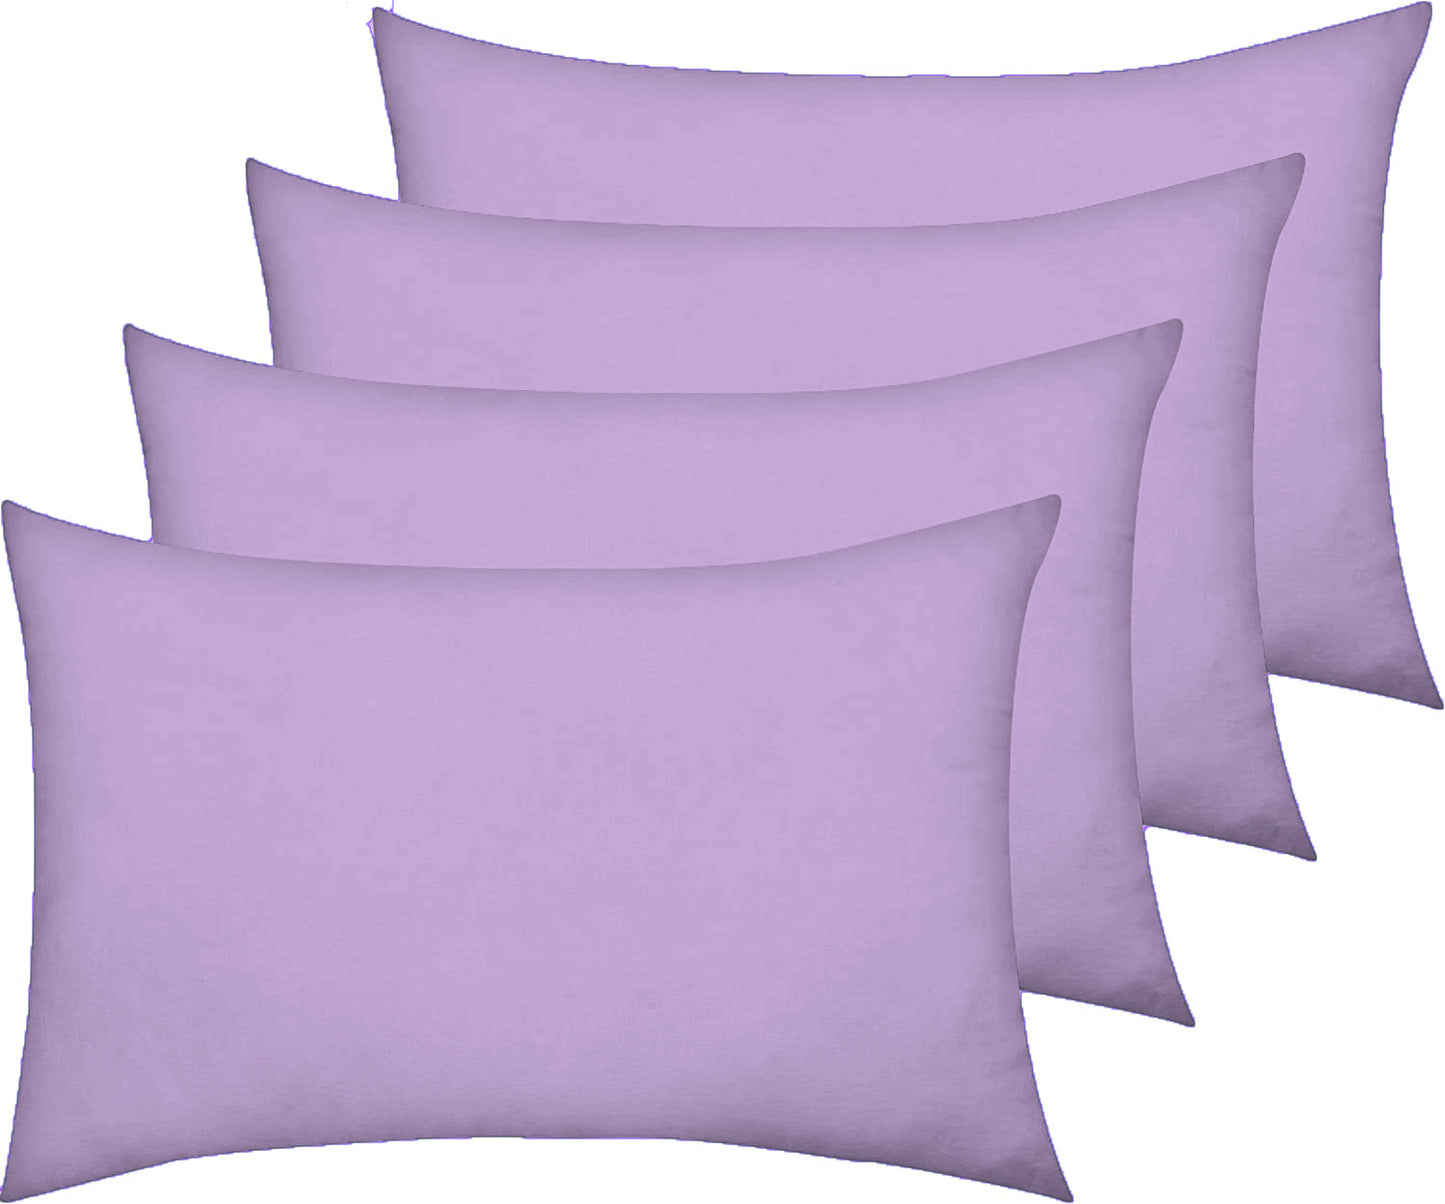 AmigoZone New 4 Pack Pillowcases Housewife Plain Cover Polycotton Percale Bedroom Pillowcases